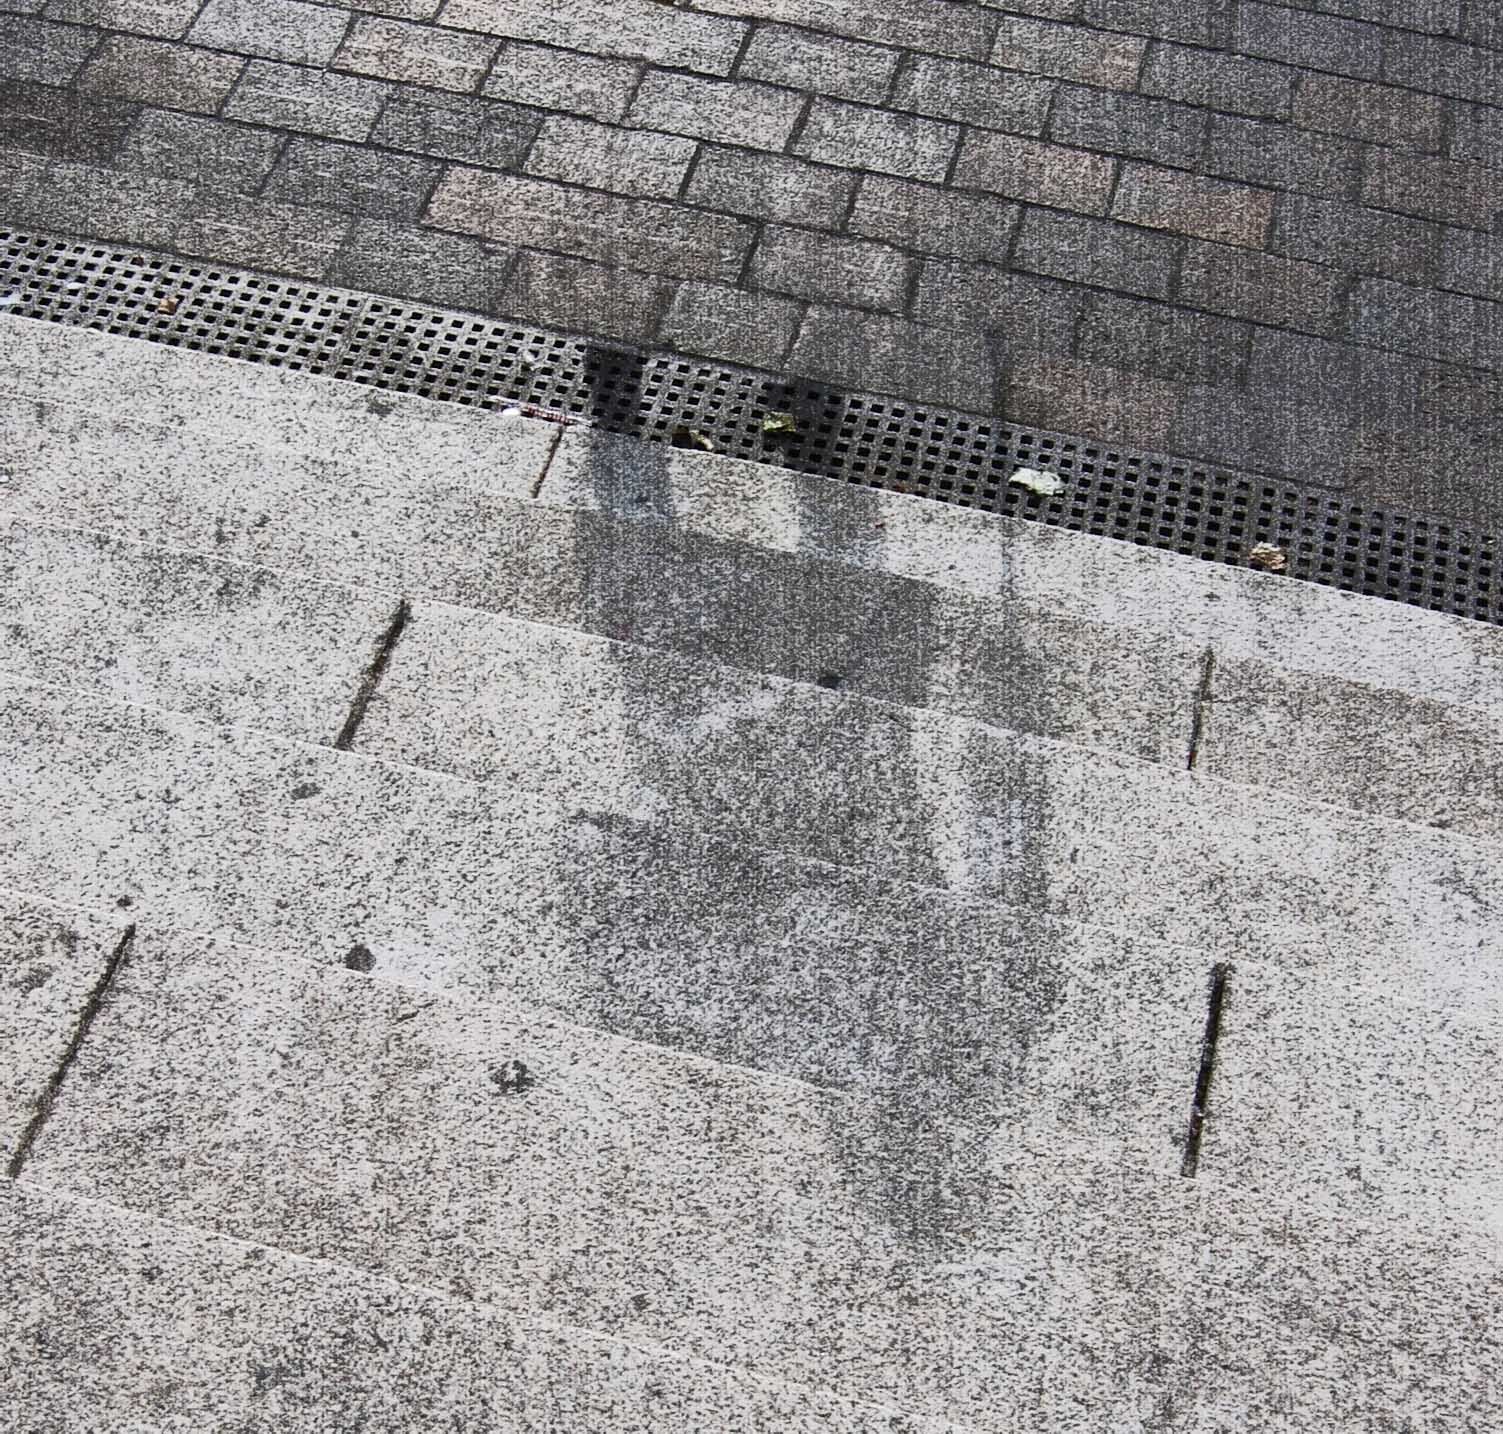 After Hiroshima, there were shadow outlines of people who had been alive, but had died and disintegrated instantly in the blast.